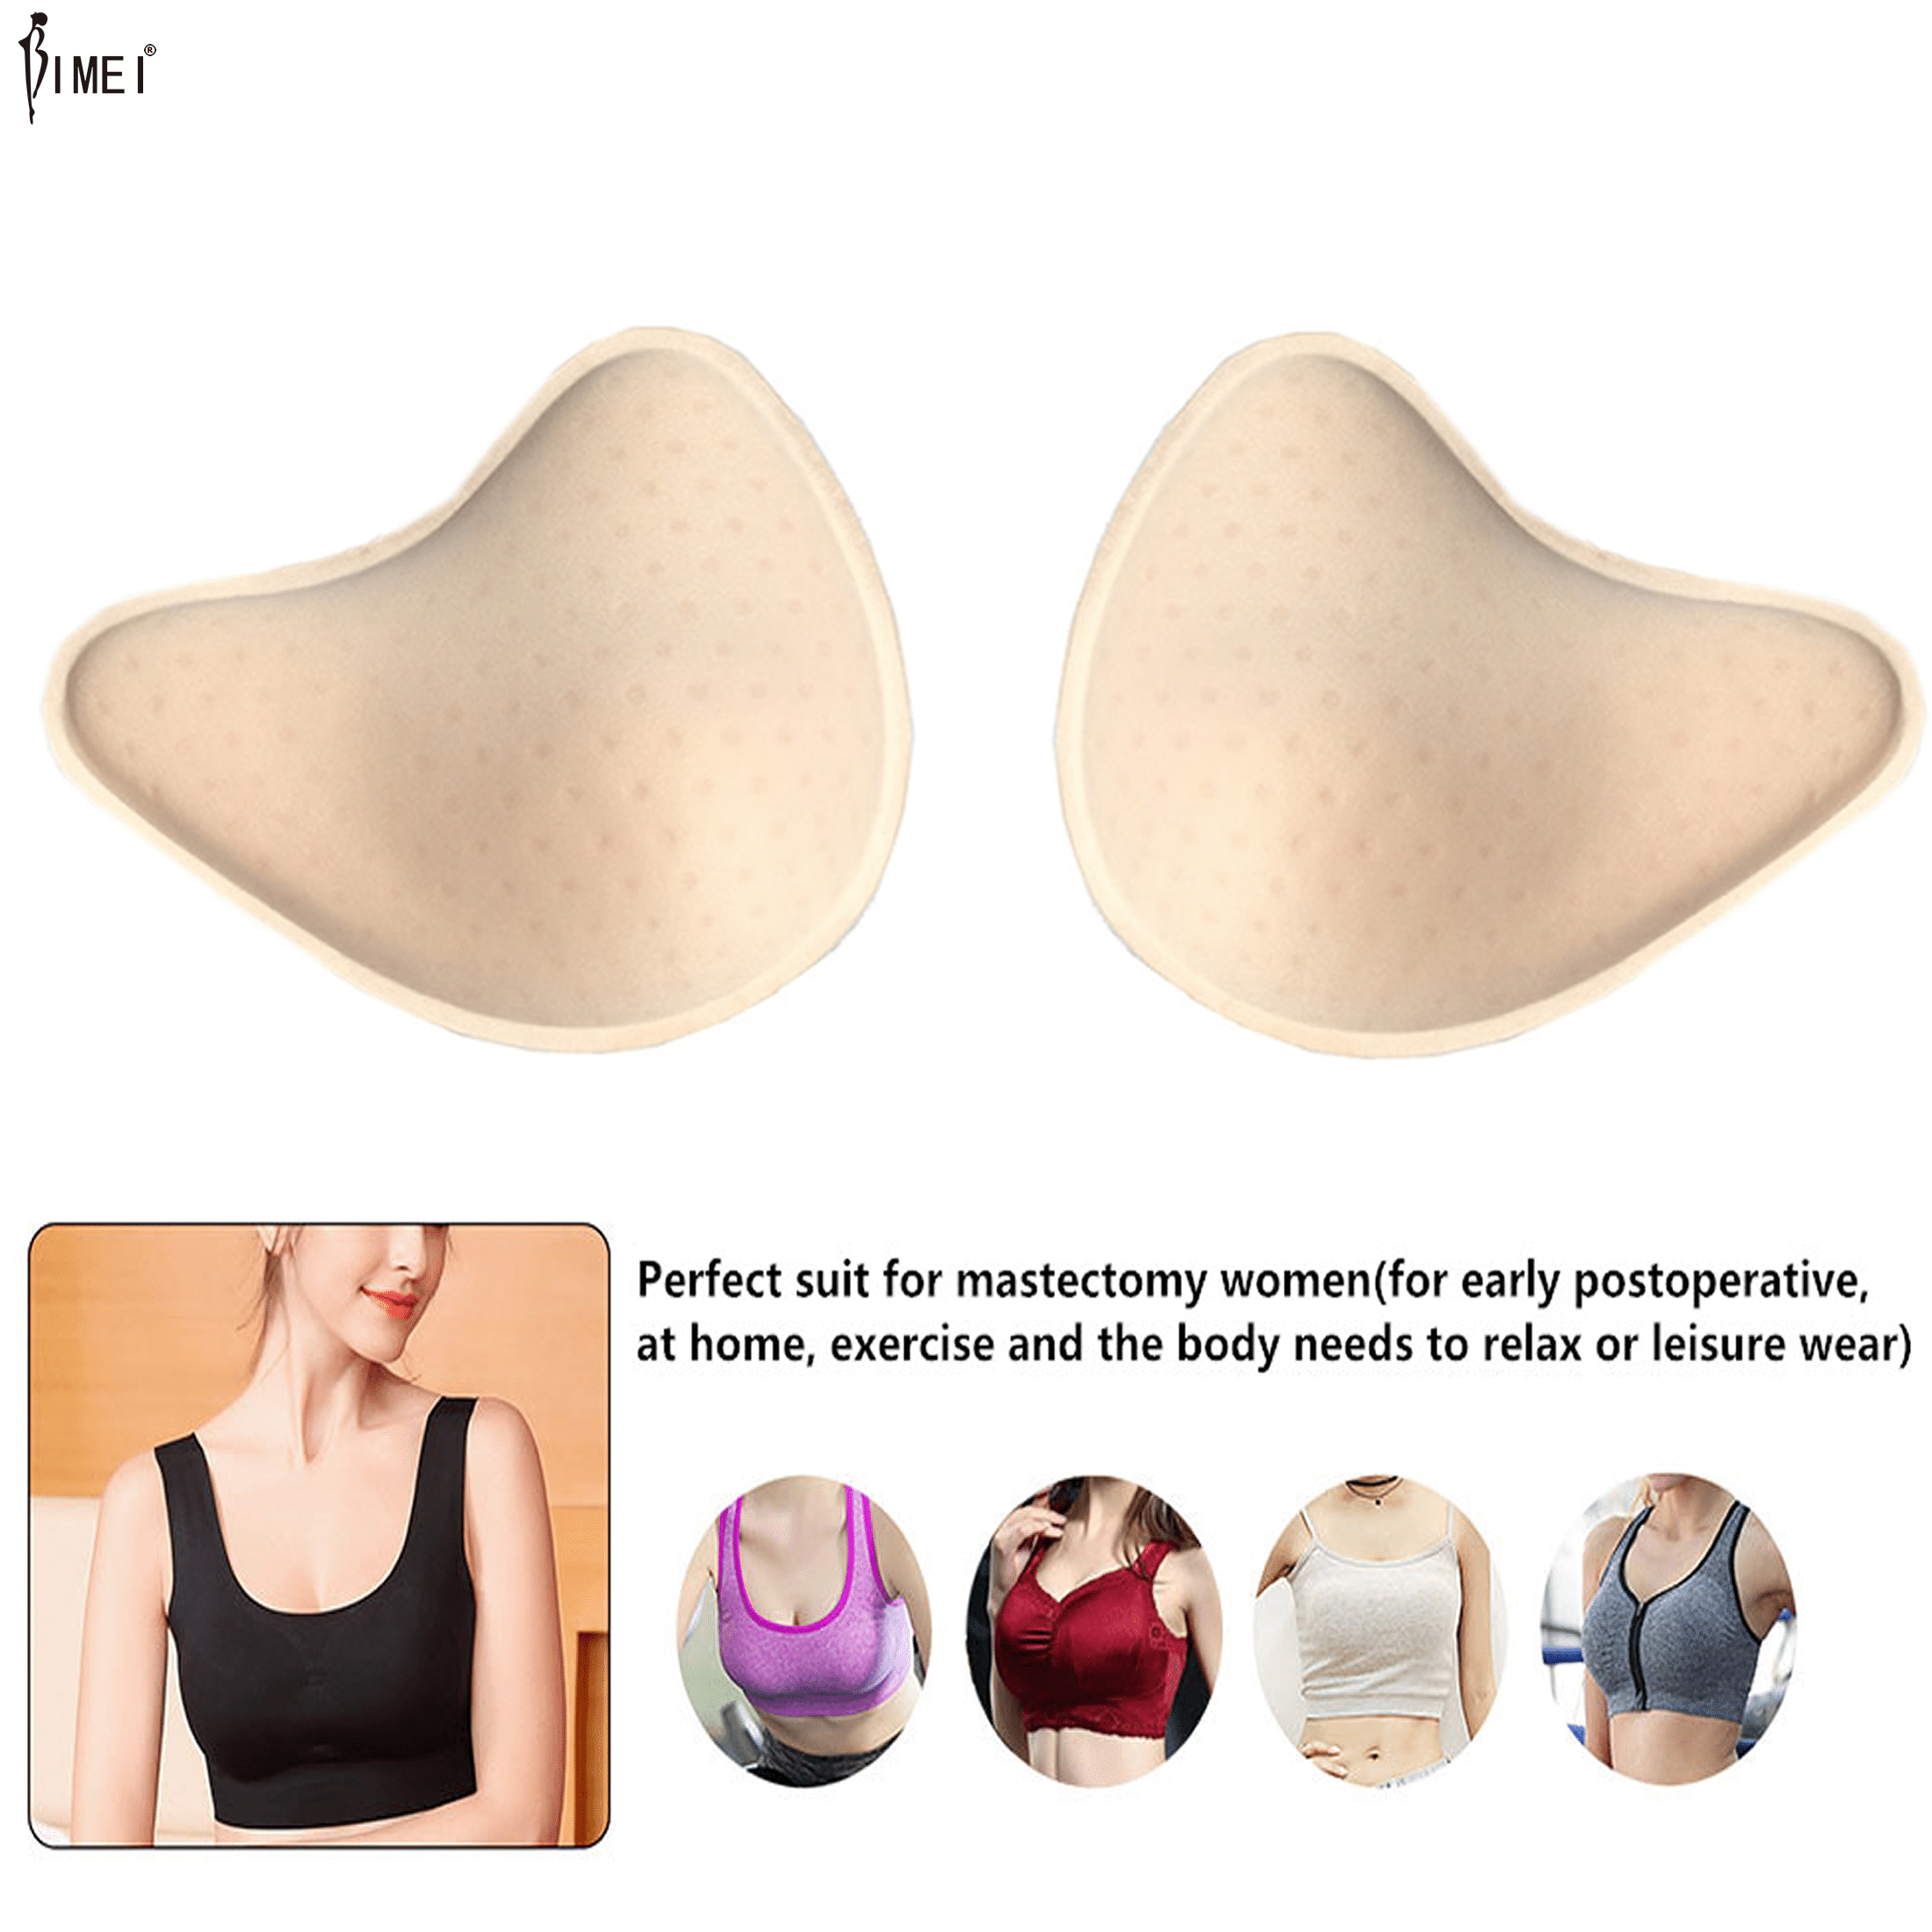 BIMEI Cotton Breast Forms Breast Prosthesis Mastectomy Bra Insert Pads  Light-Weight Ventilation Sponge Boobs for Women Mastectomy Breast Cancer  Support #1,Holey Spiral,1 Piece,Right,L 